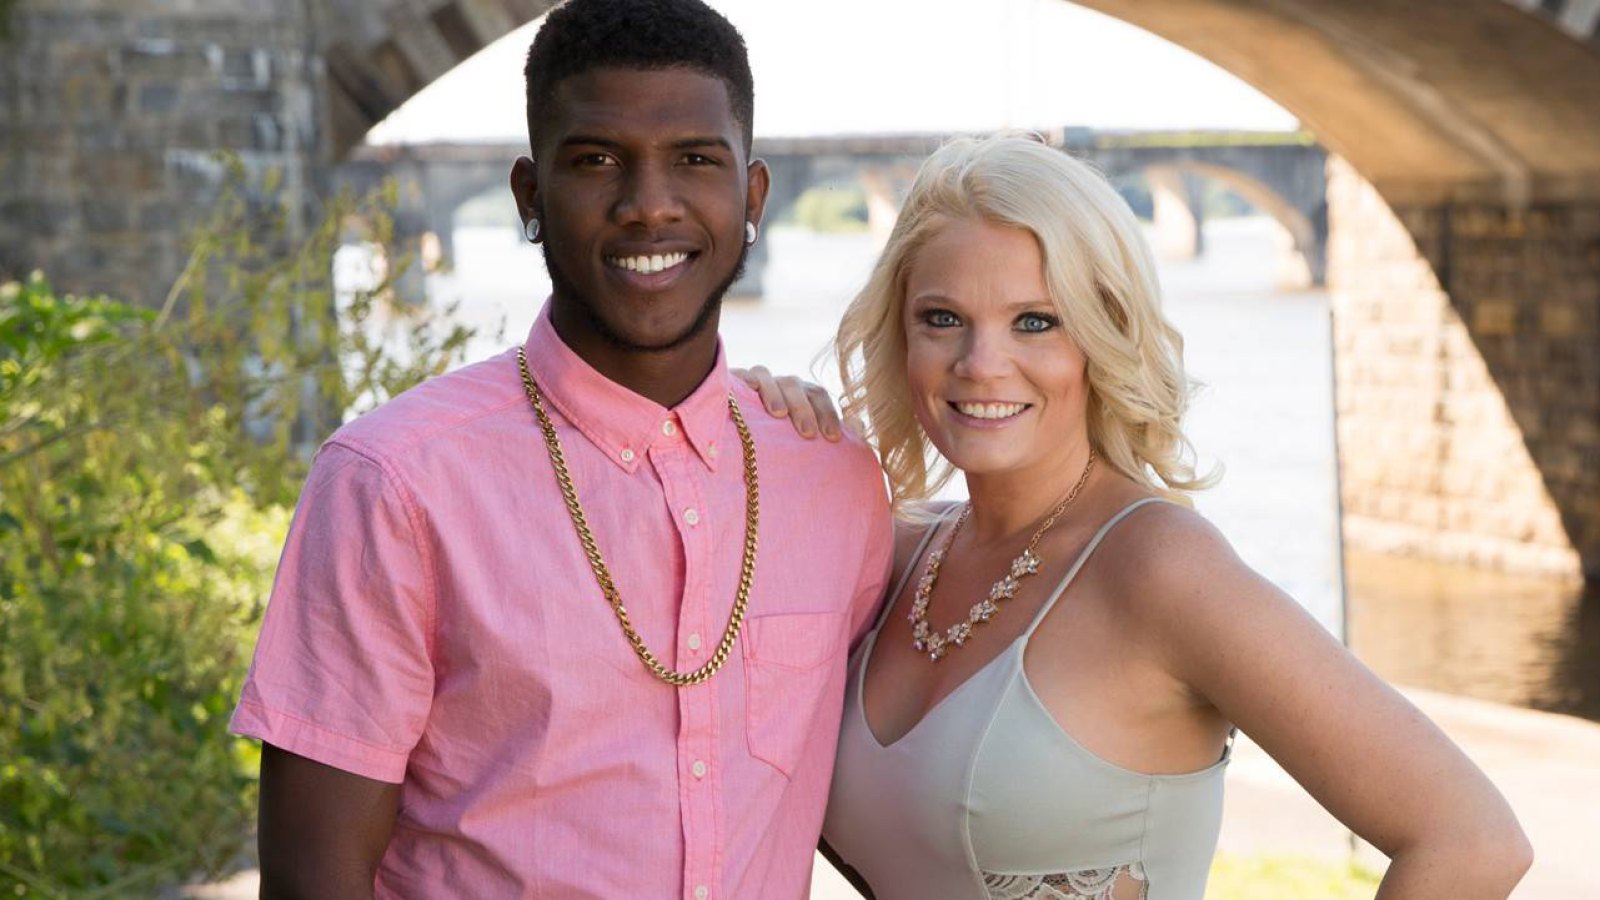 ‘90 Day Fiance’ Star Ashley Martson Undergoes Surgery After She’s Hospitalized for Kidney Failure